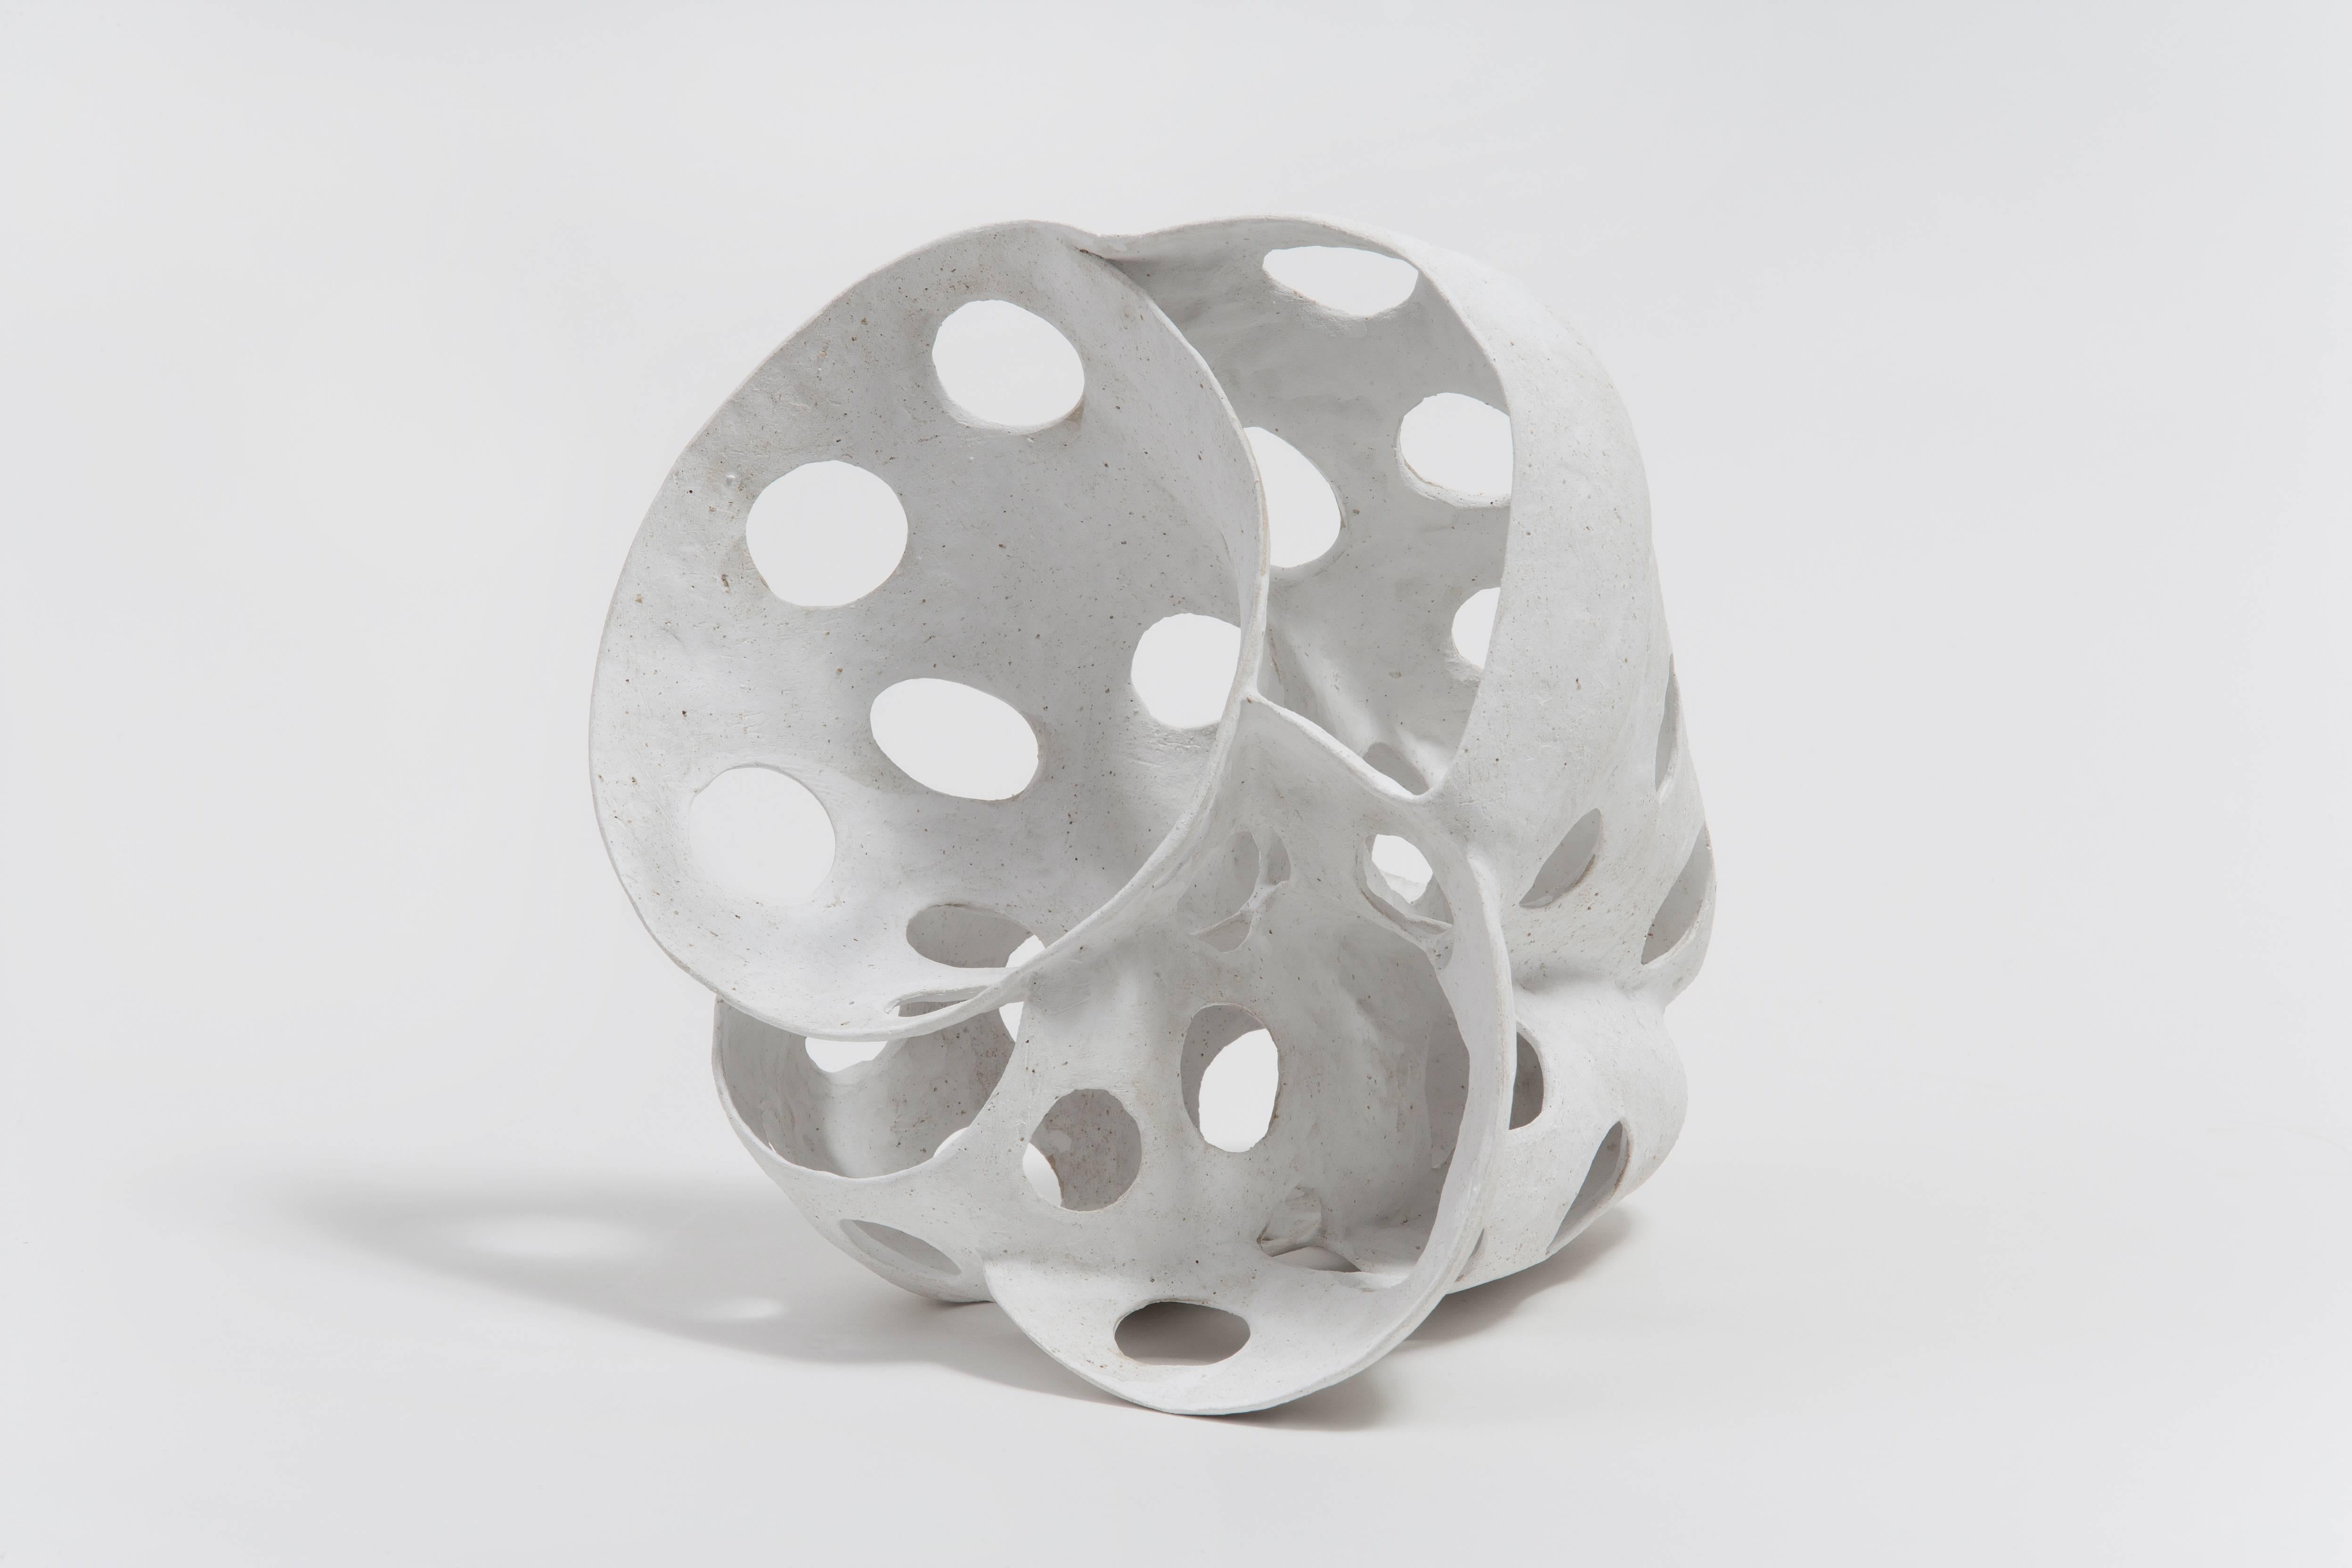 Small basket lll by Kristina Riska 2016. Ceramic with aluminum oxide slip glaze.
This sculpture is unique; number 3 in a series of 5 in Riska's studio at Arabia Porcelain Factory, Helsinki, Finland.

Measures: 11.5” W x 9” H

 